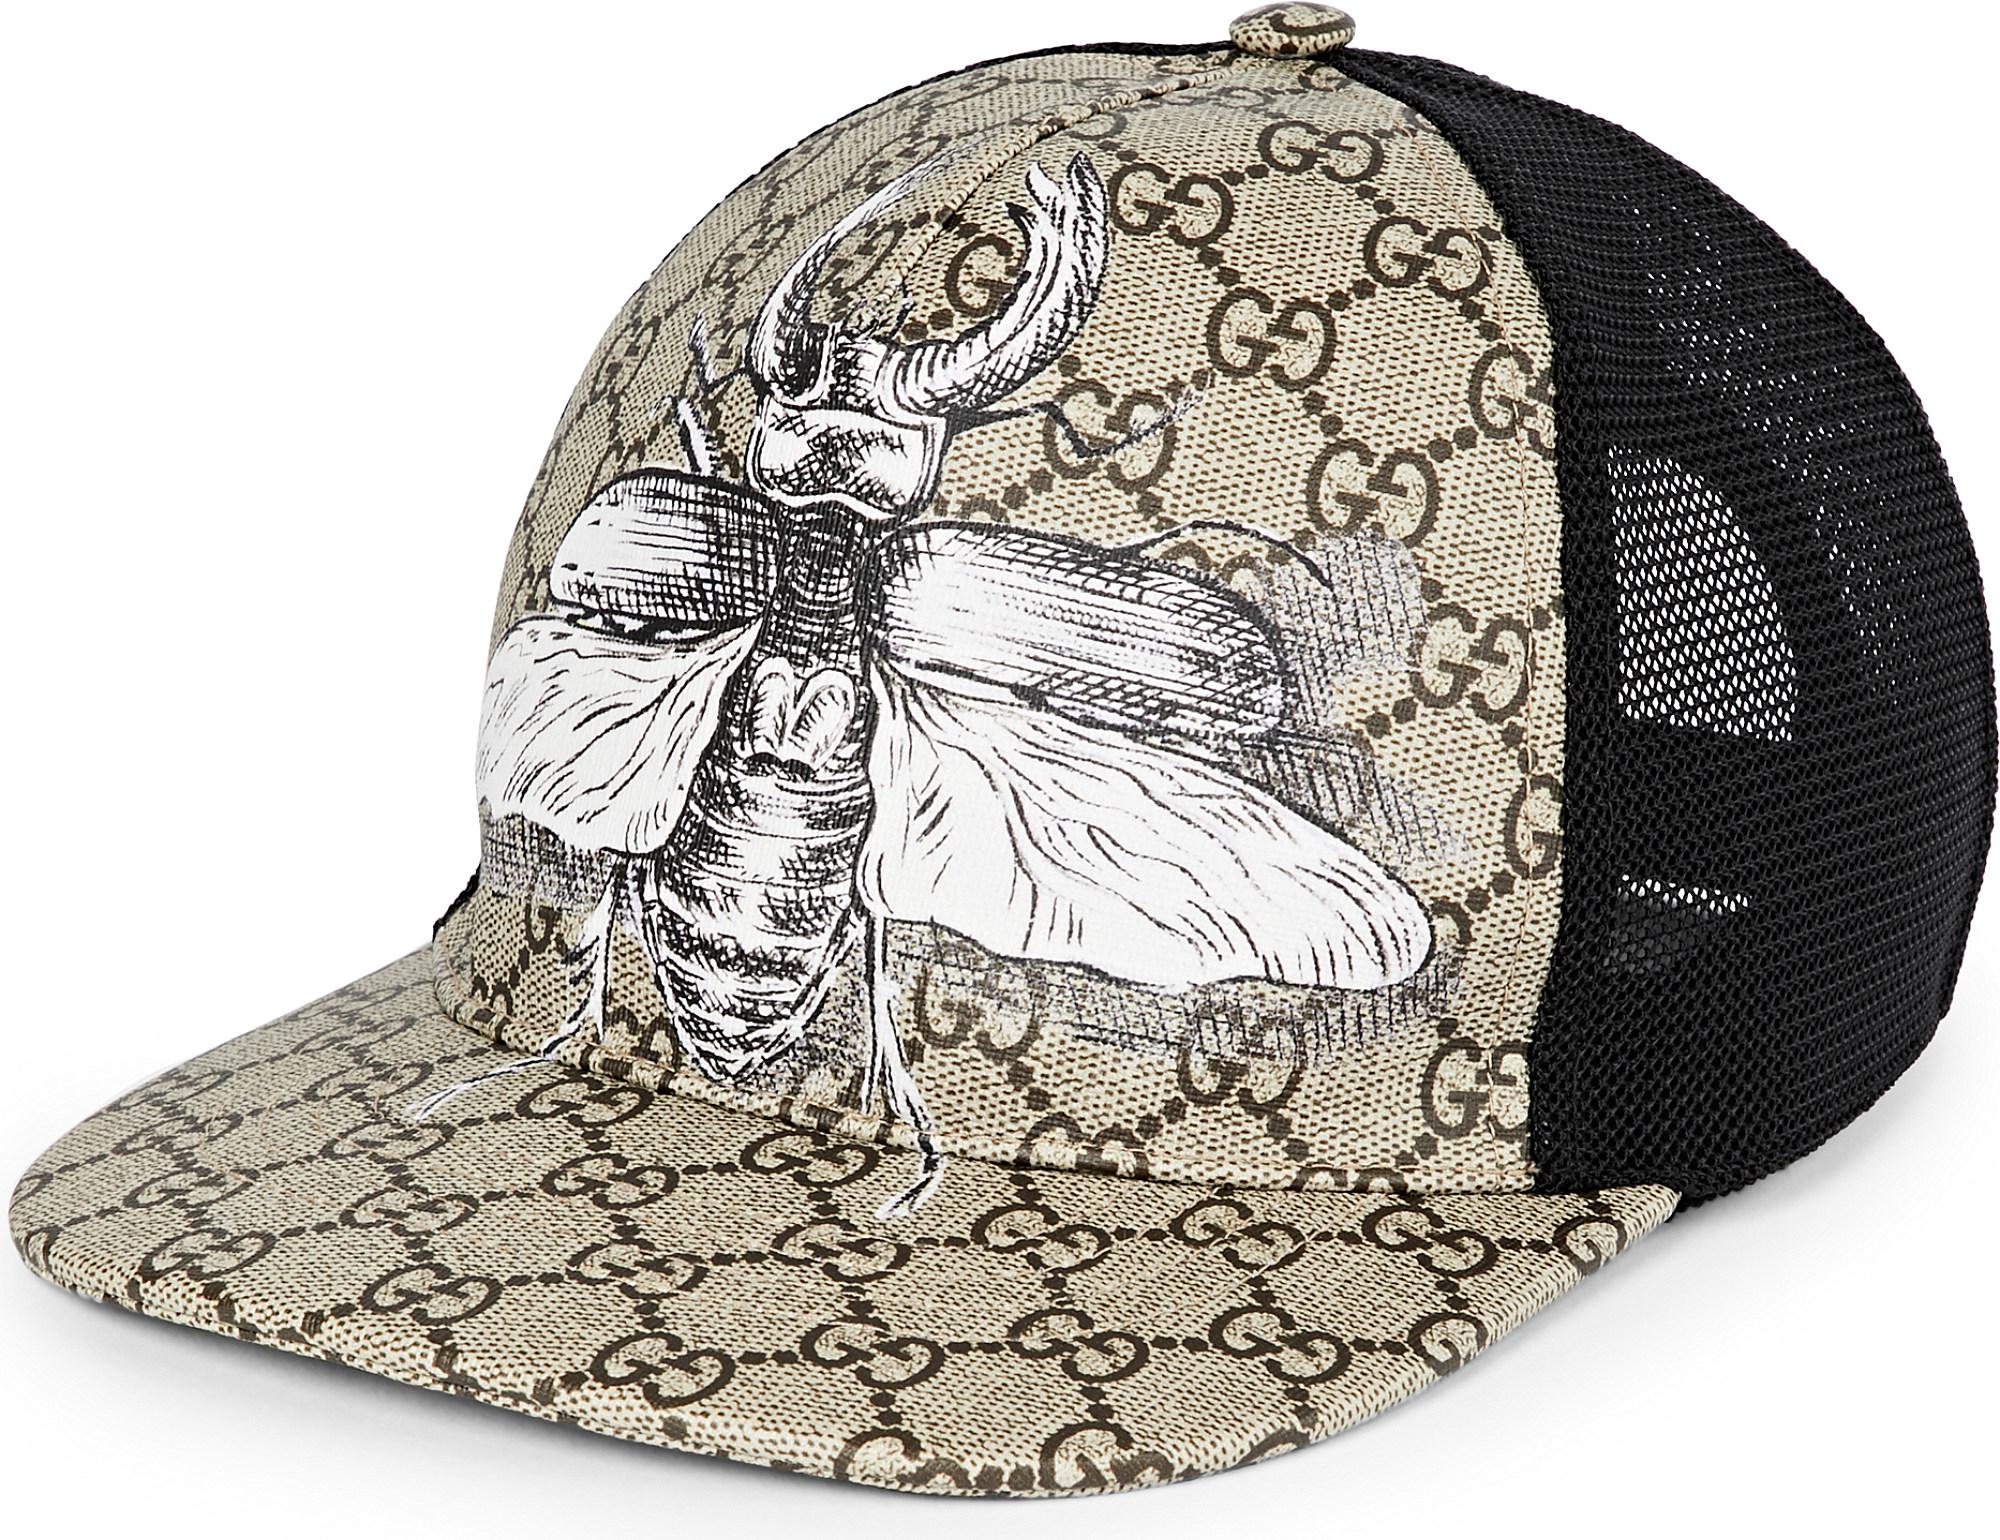 Kontinent offset Fradrage Gucci Insect Canvas Baseball Cap in Beige (Natural) for Men - Lyst